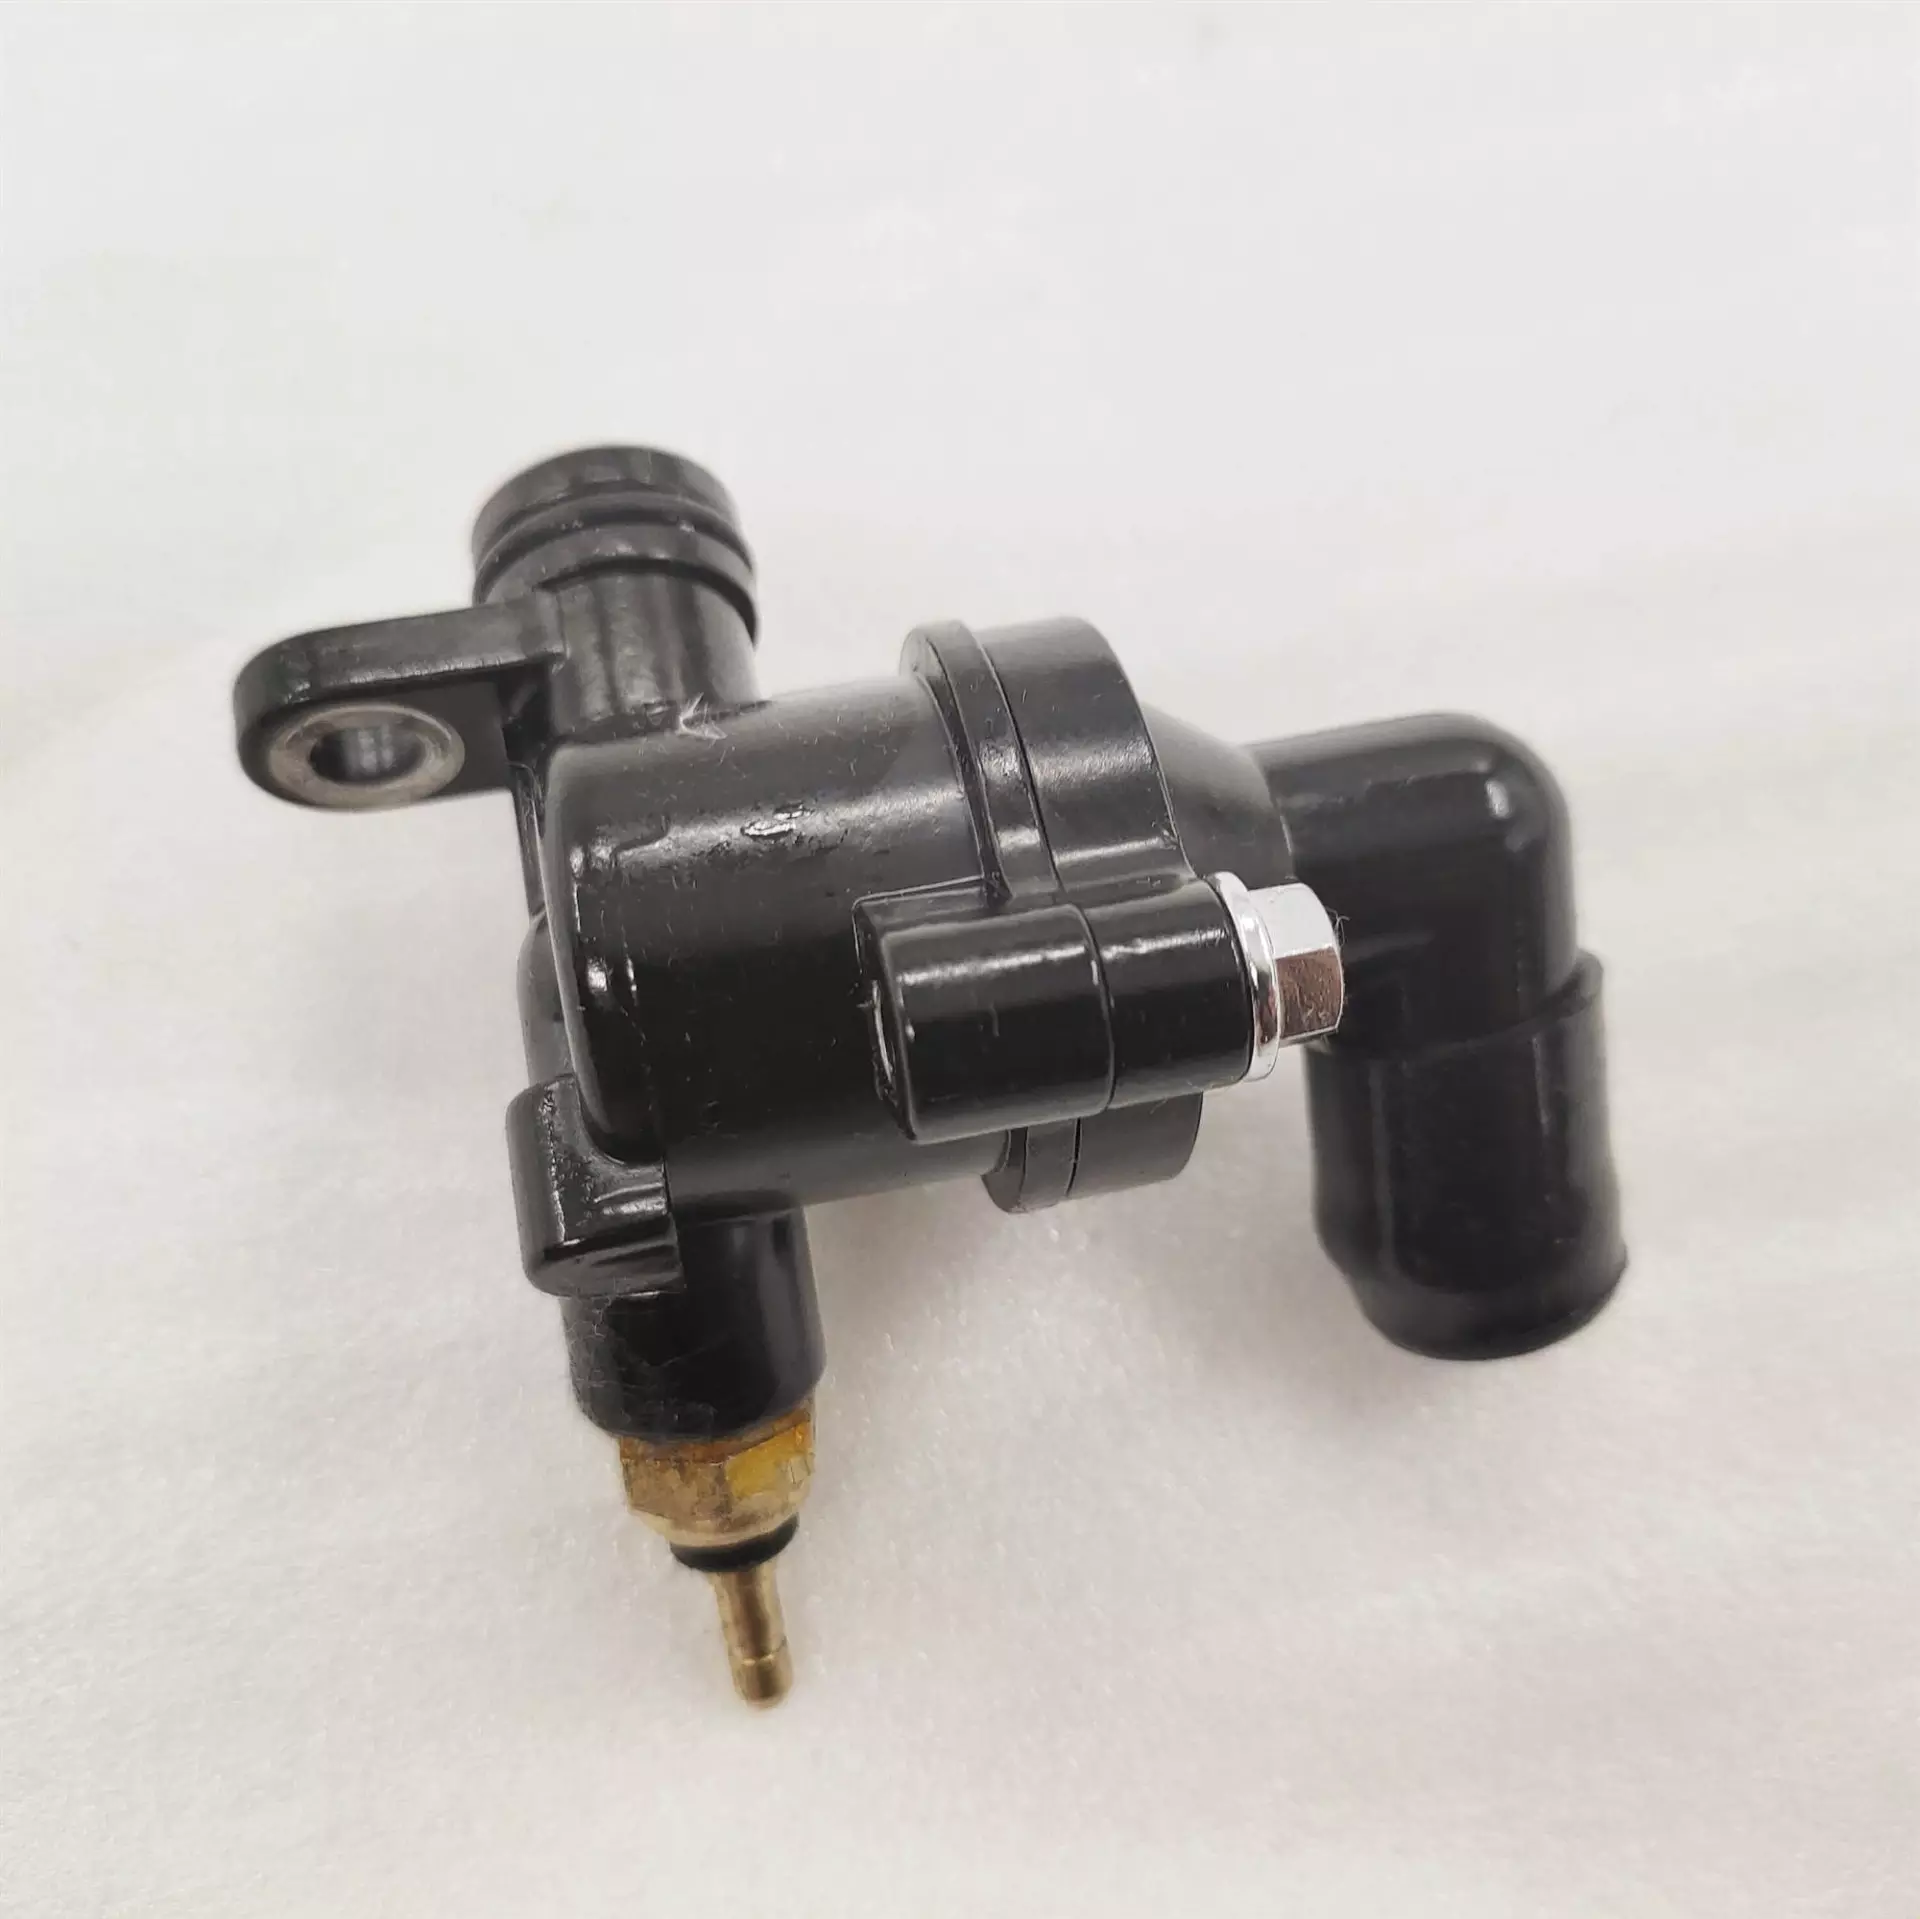 Design LF250 Water-cooled Engine Thermostat Engine Auto Parts Thermostat Engine Cooling System for Tricycle High Quality New 250